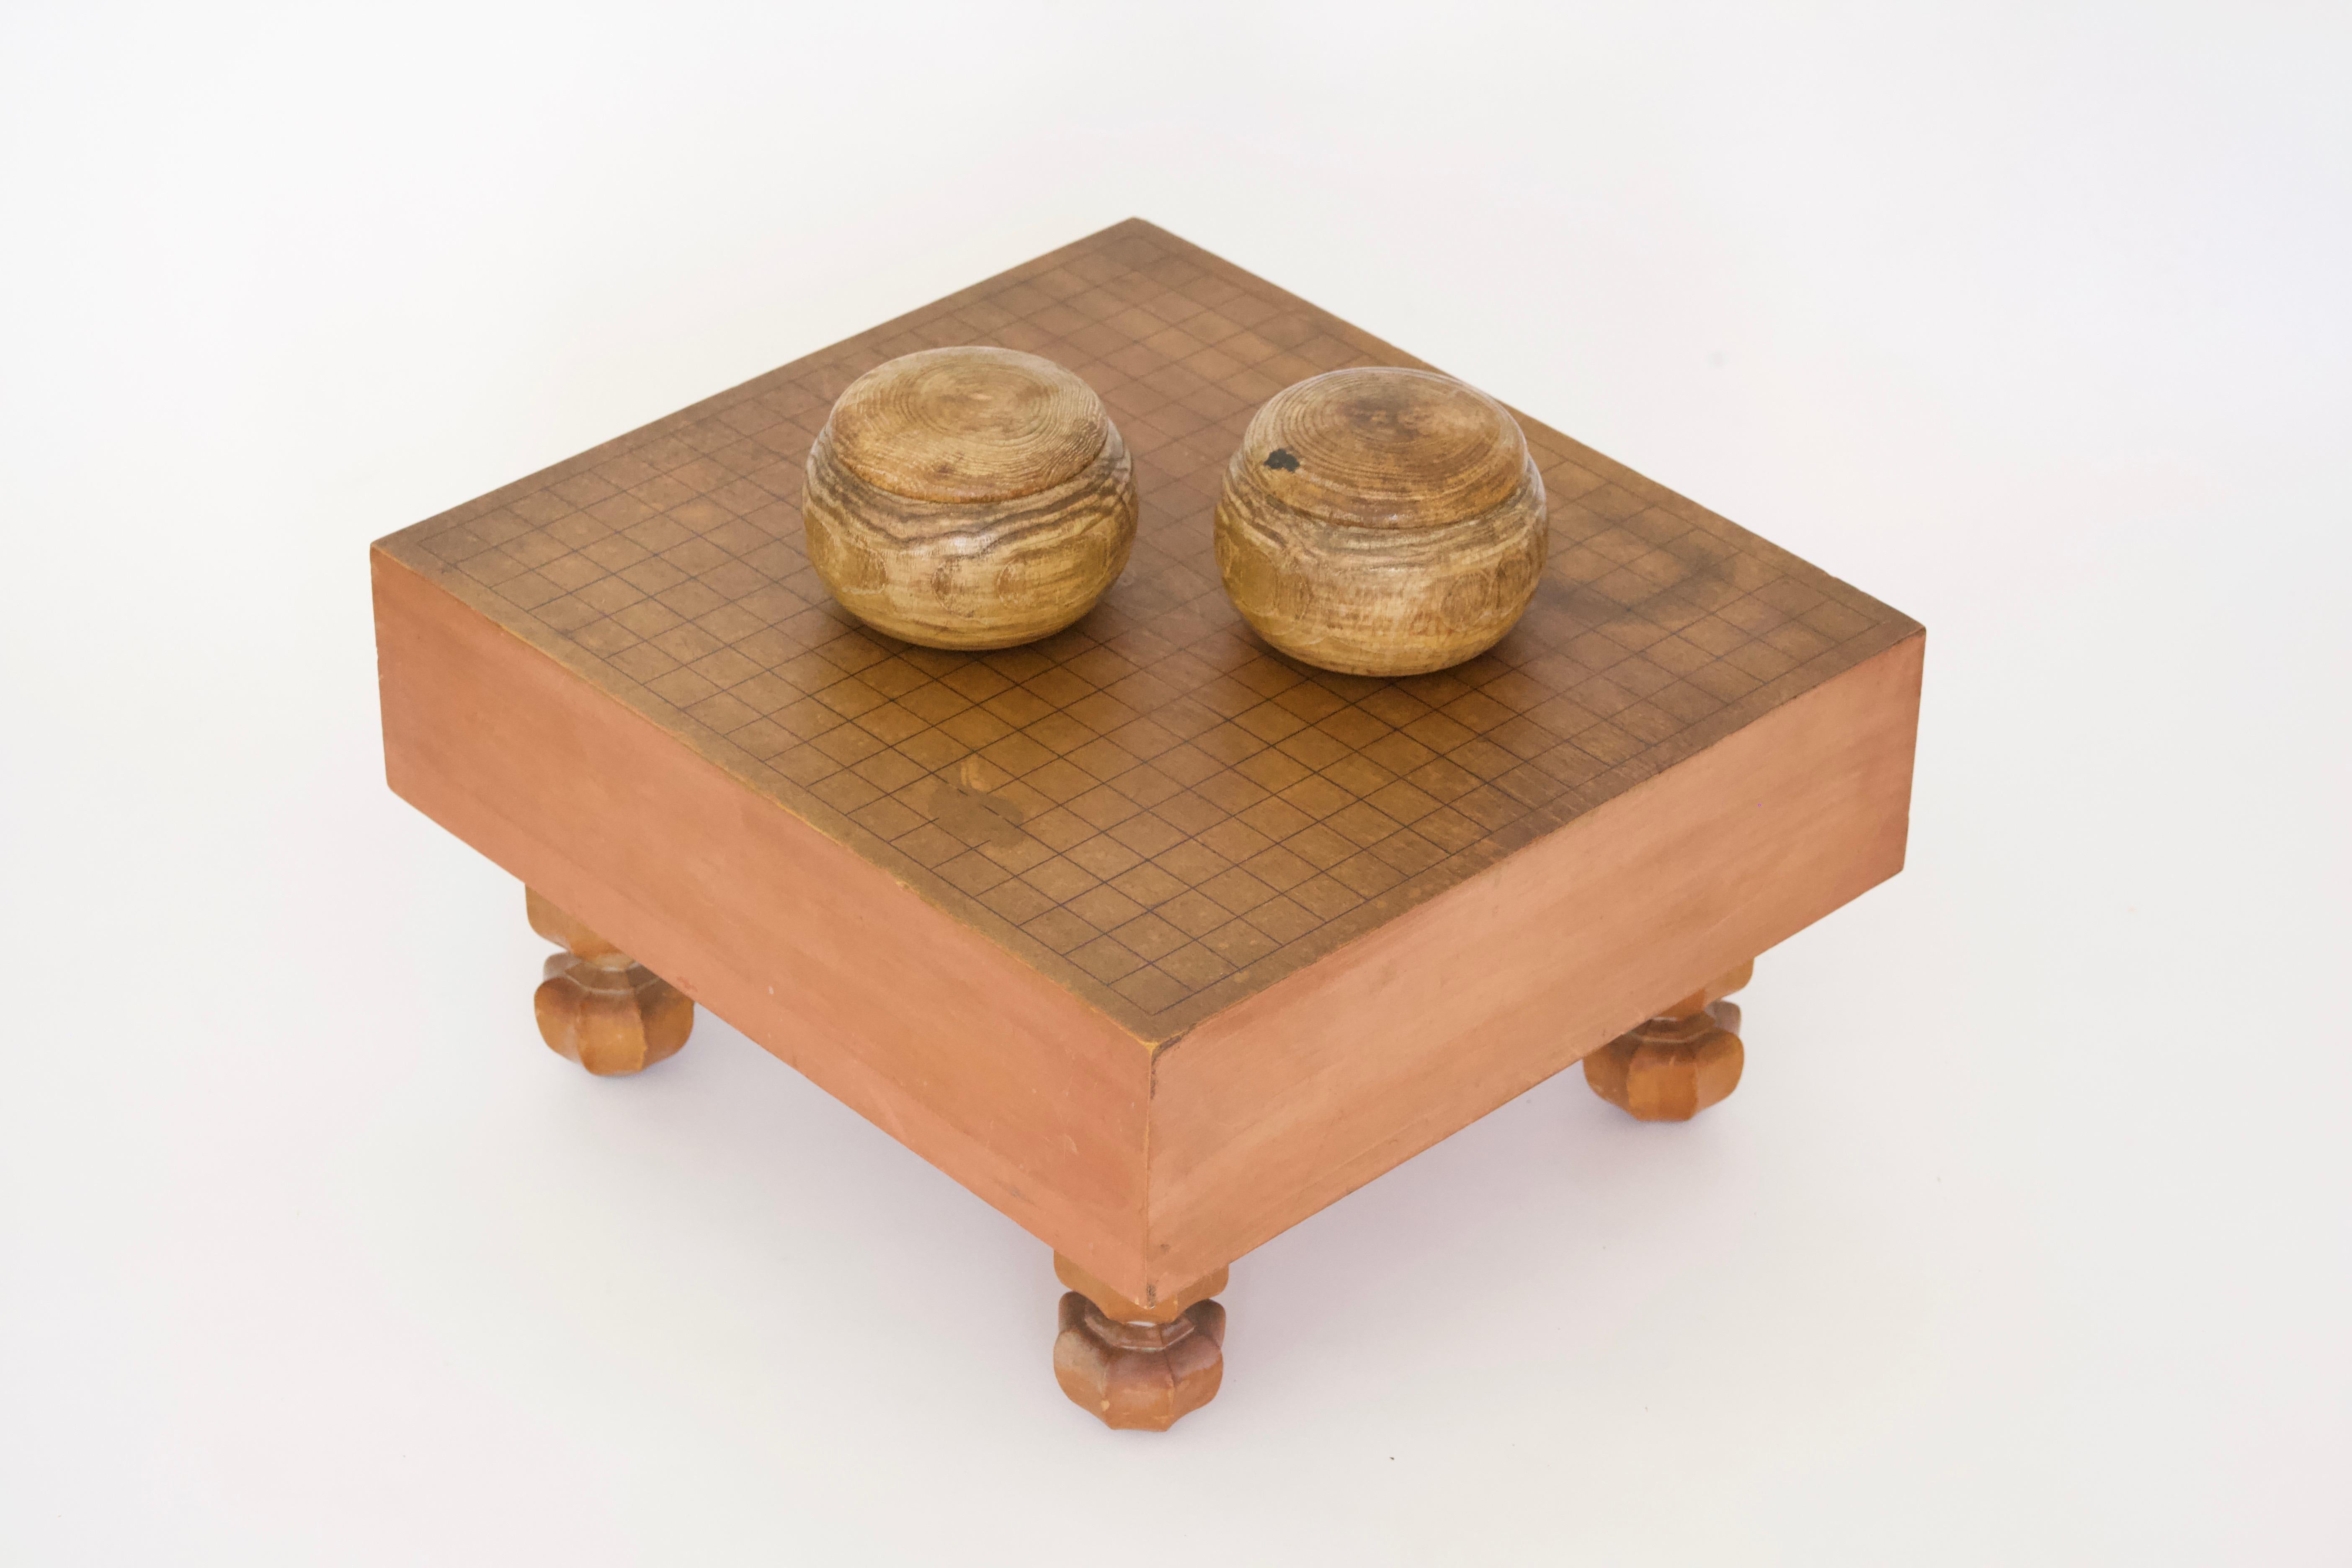 Minimalist Vintage Japanese Go Ban Game Board and Stones